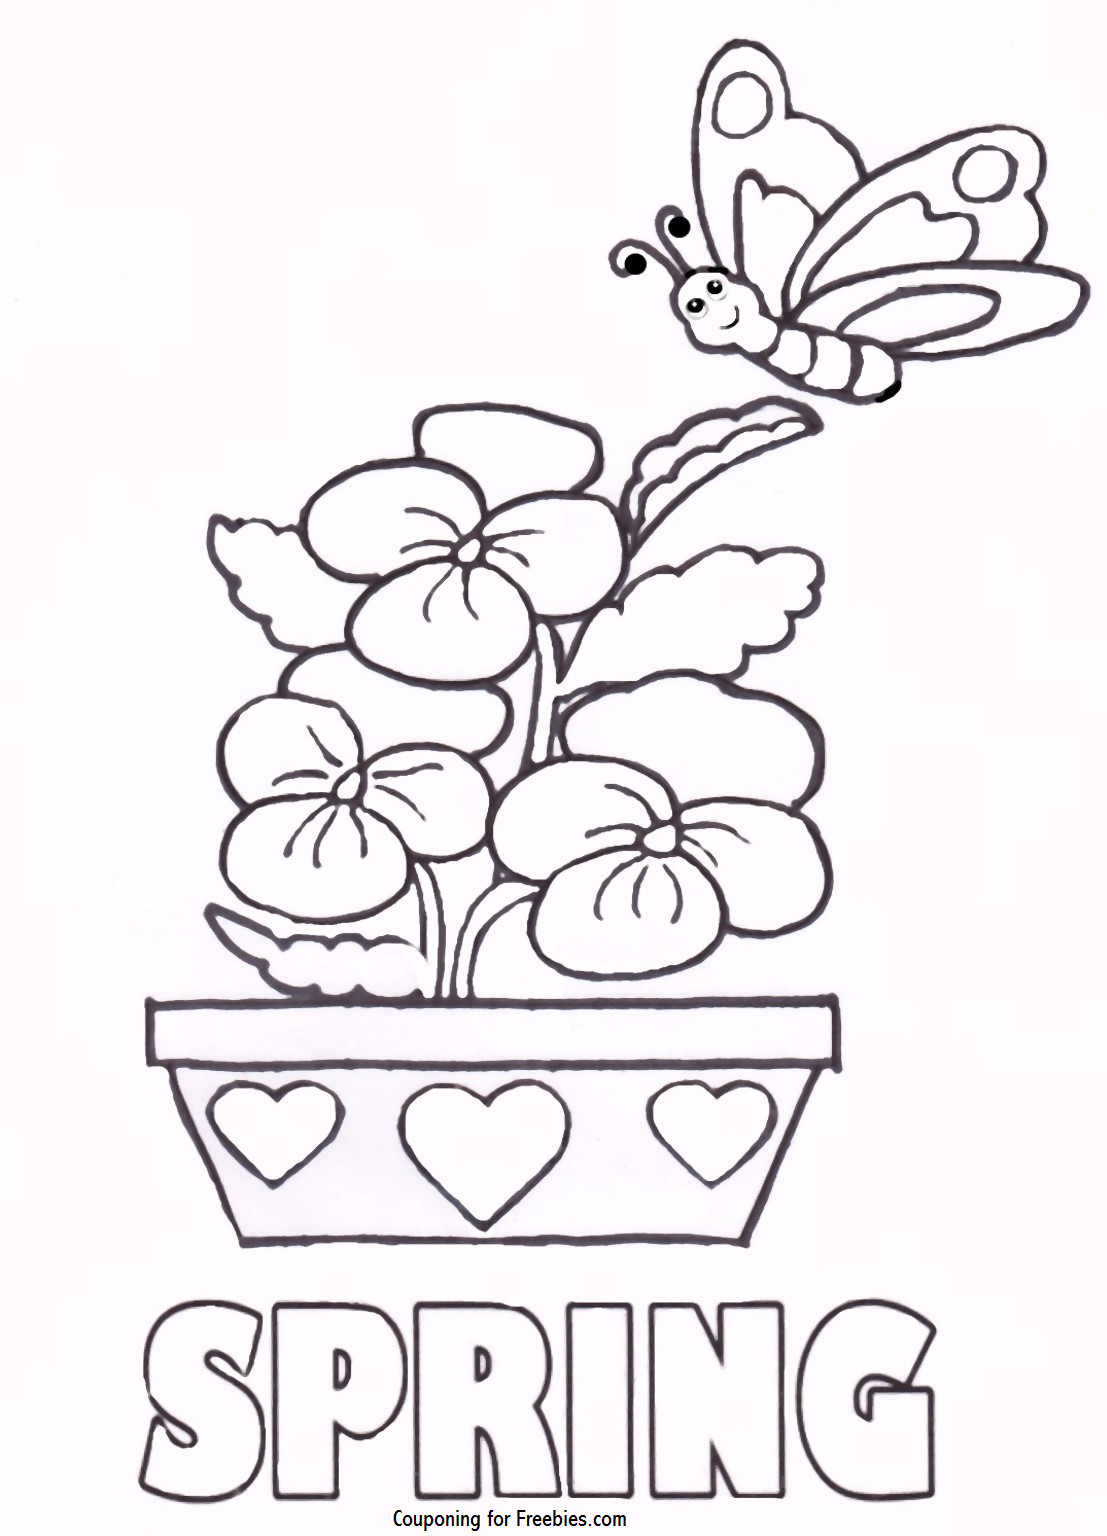 Free Spring Coloring Pages
 FREE Printable Coloring Page With Spring Theme FREE For